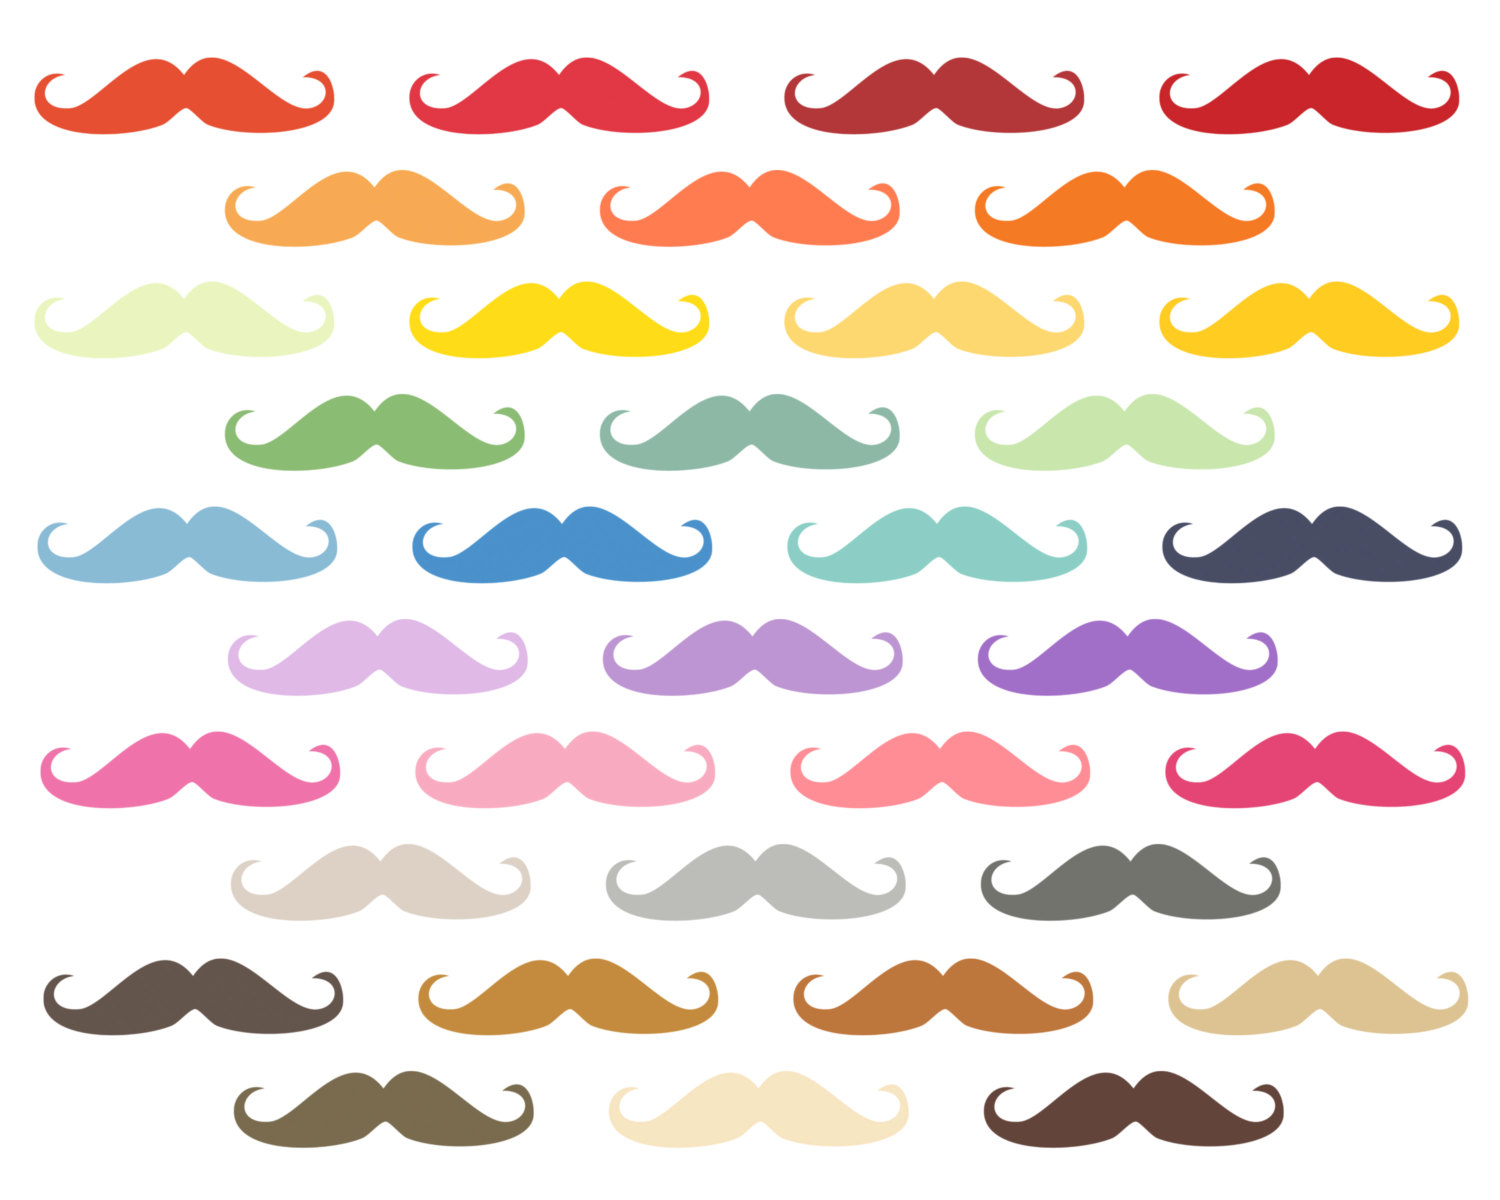 Popular items for moustache clipart on Etsy